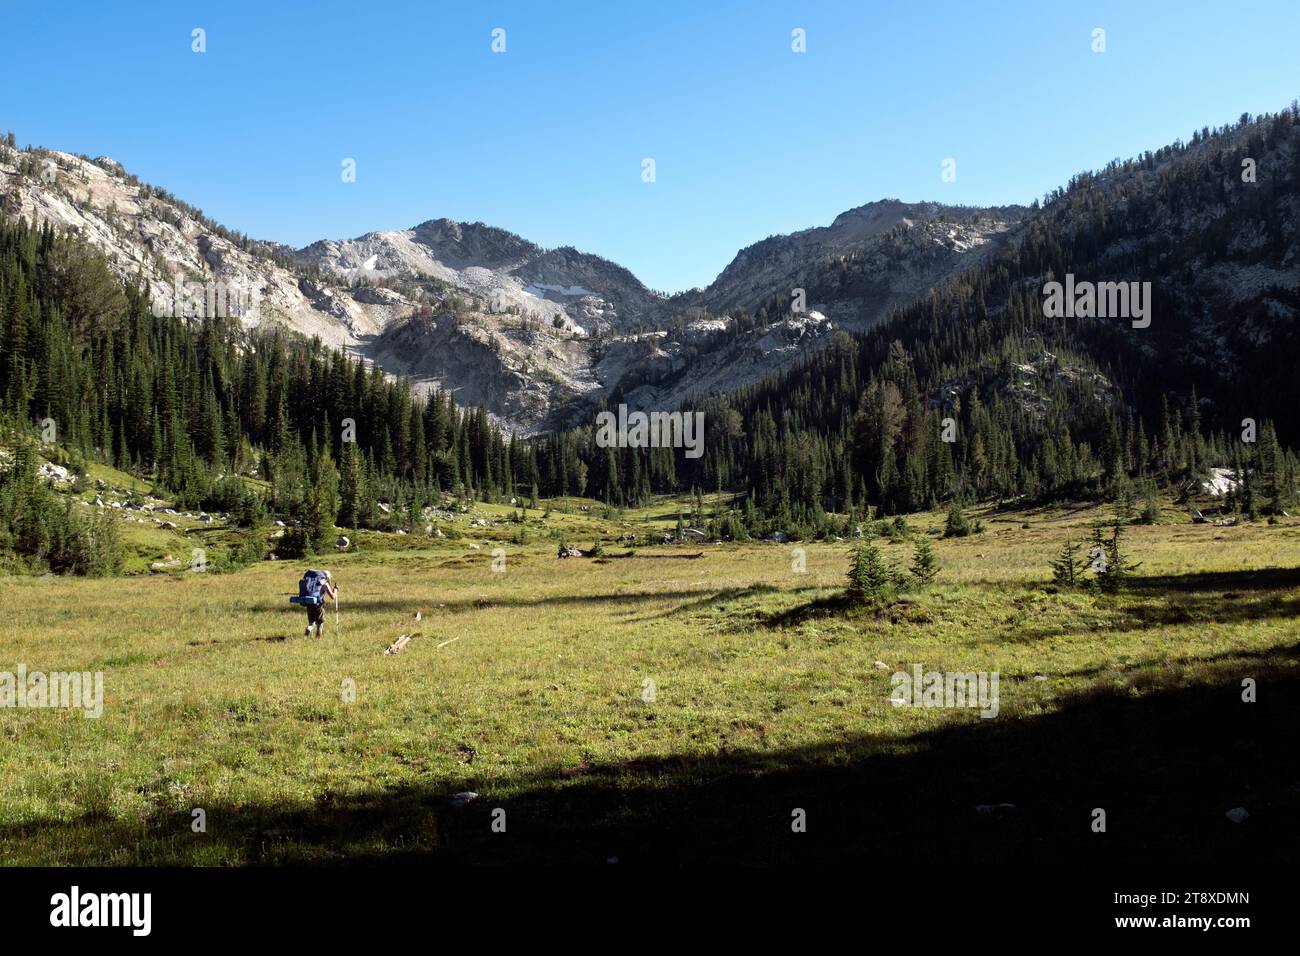 OR02669-00....OREGON - Woman backpacking on the Copper Creek Trail #1656 inthe Eagle Cap Wilderness, Wallowa-Whitman National Forest. MR# S1 Stock Photo